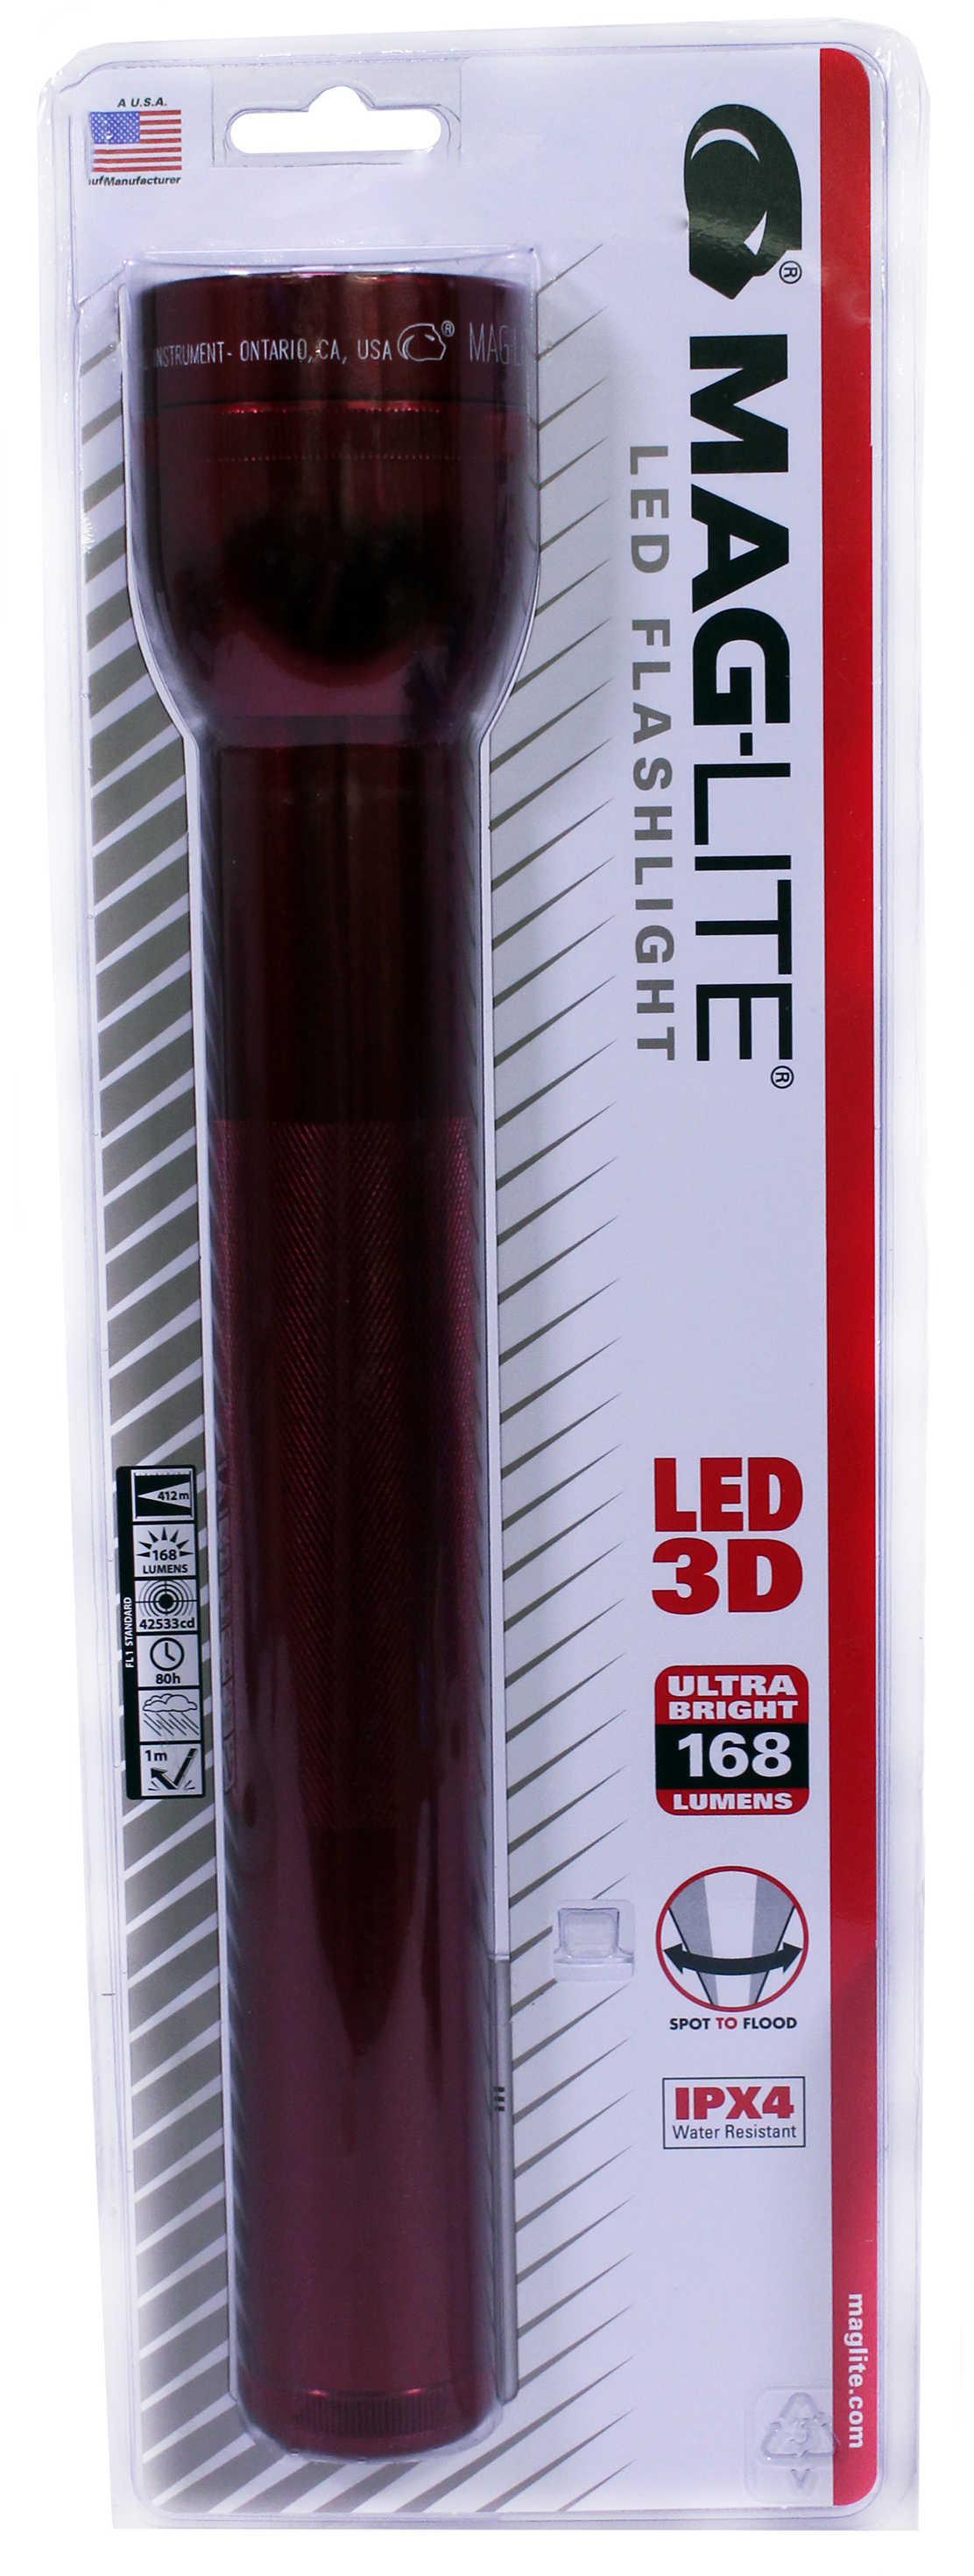 MagLite Flashlight, 3 D LED, Red - New In Package